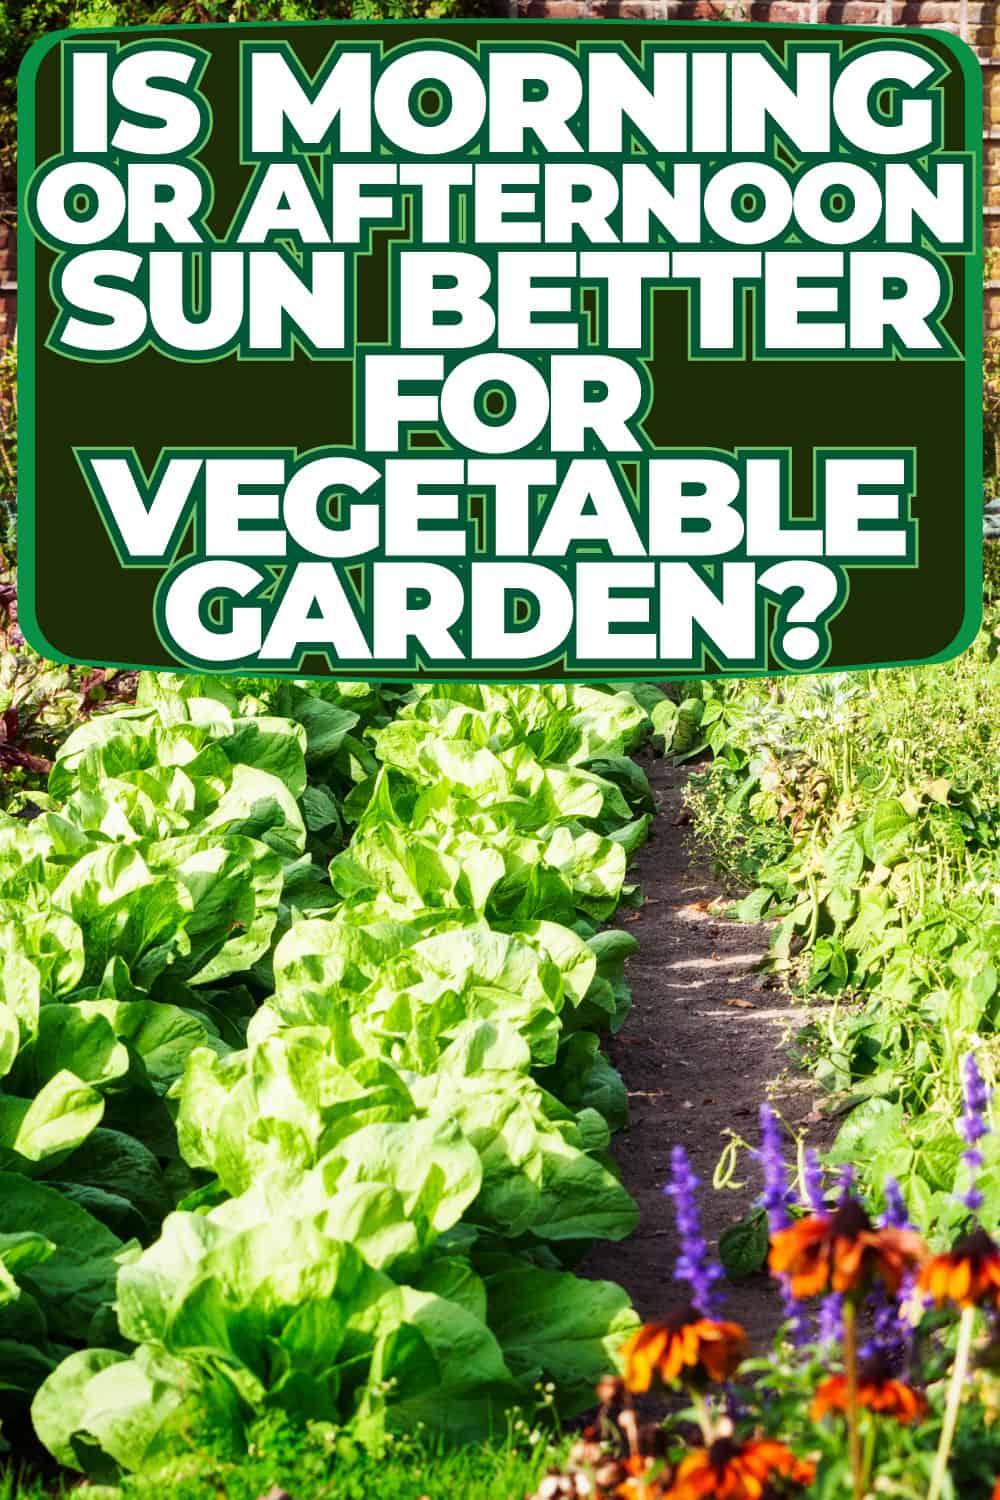 Is Morning Or Afternoon Sun Better For Vegetable Garden?